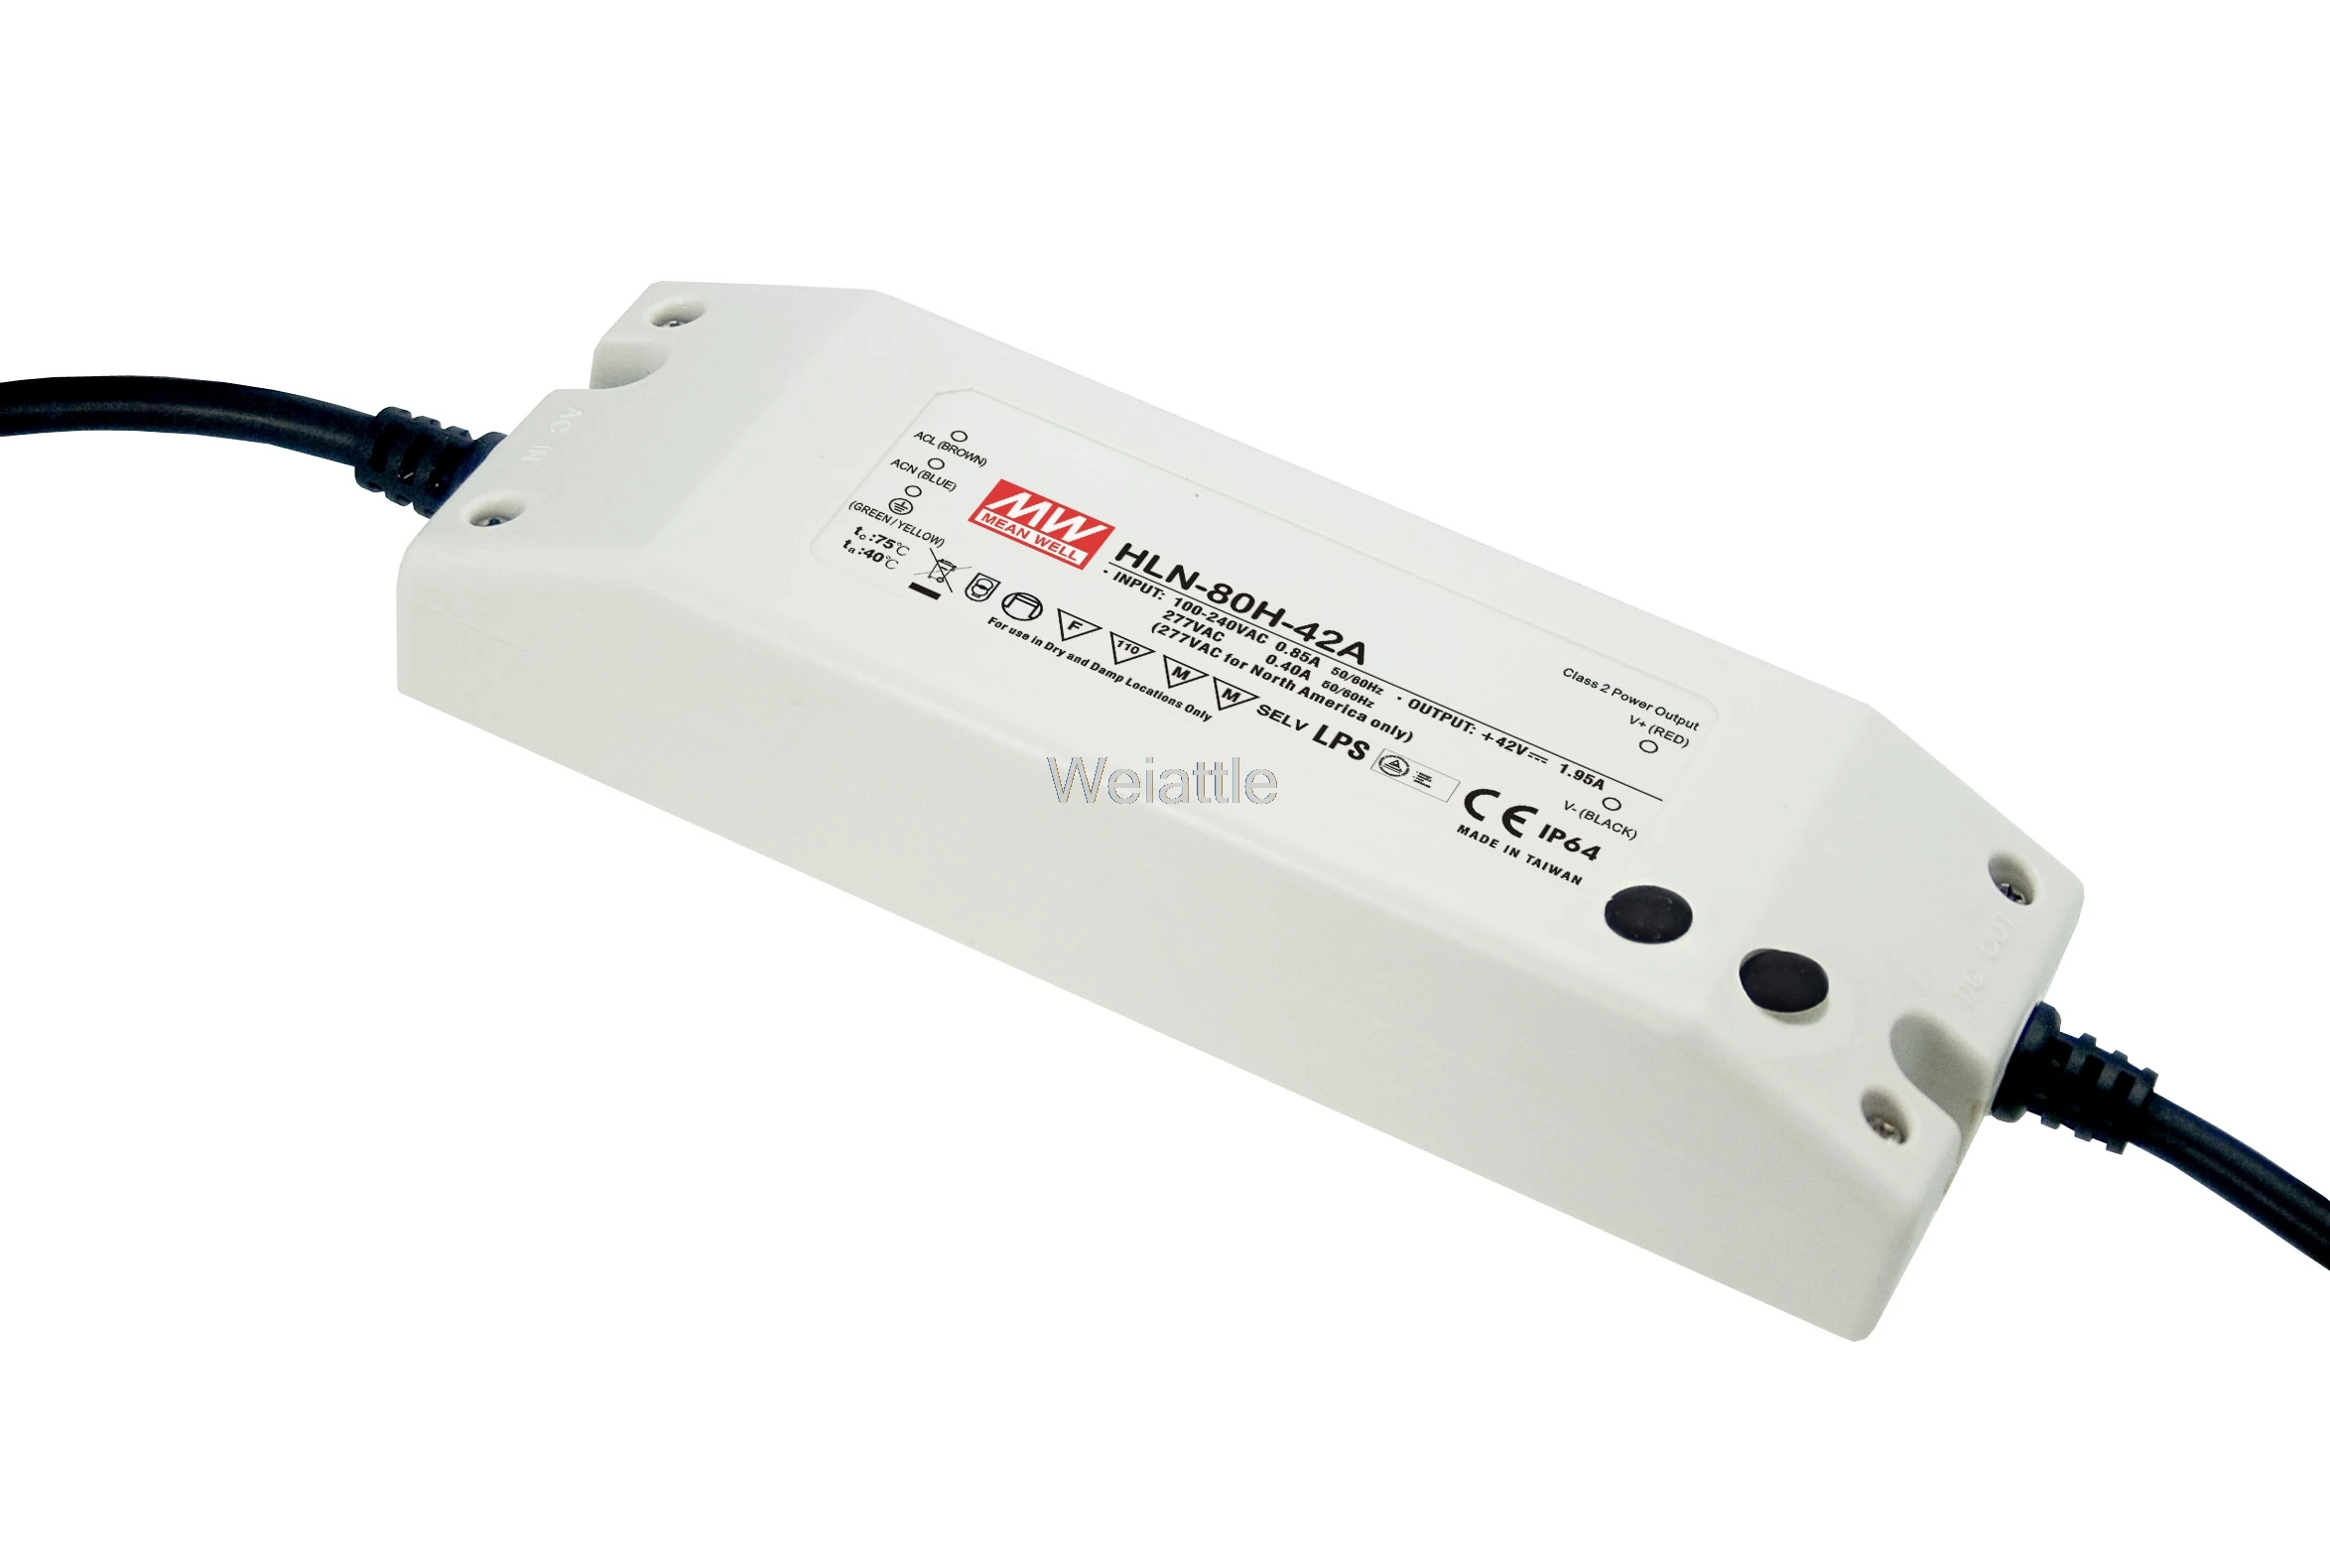 [Cheneng]MEAN WELL original HLN-80H-42A 42V 1.95A meanwell HLN-80H 42V 81.9W Single Output LED Driver Power Supply A type